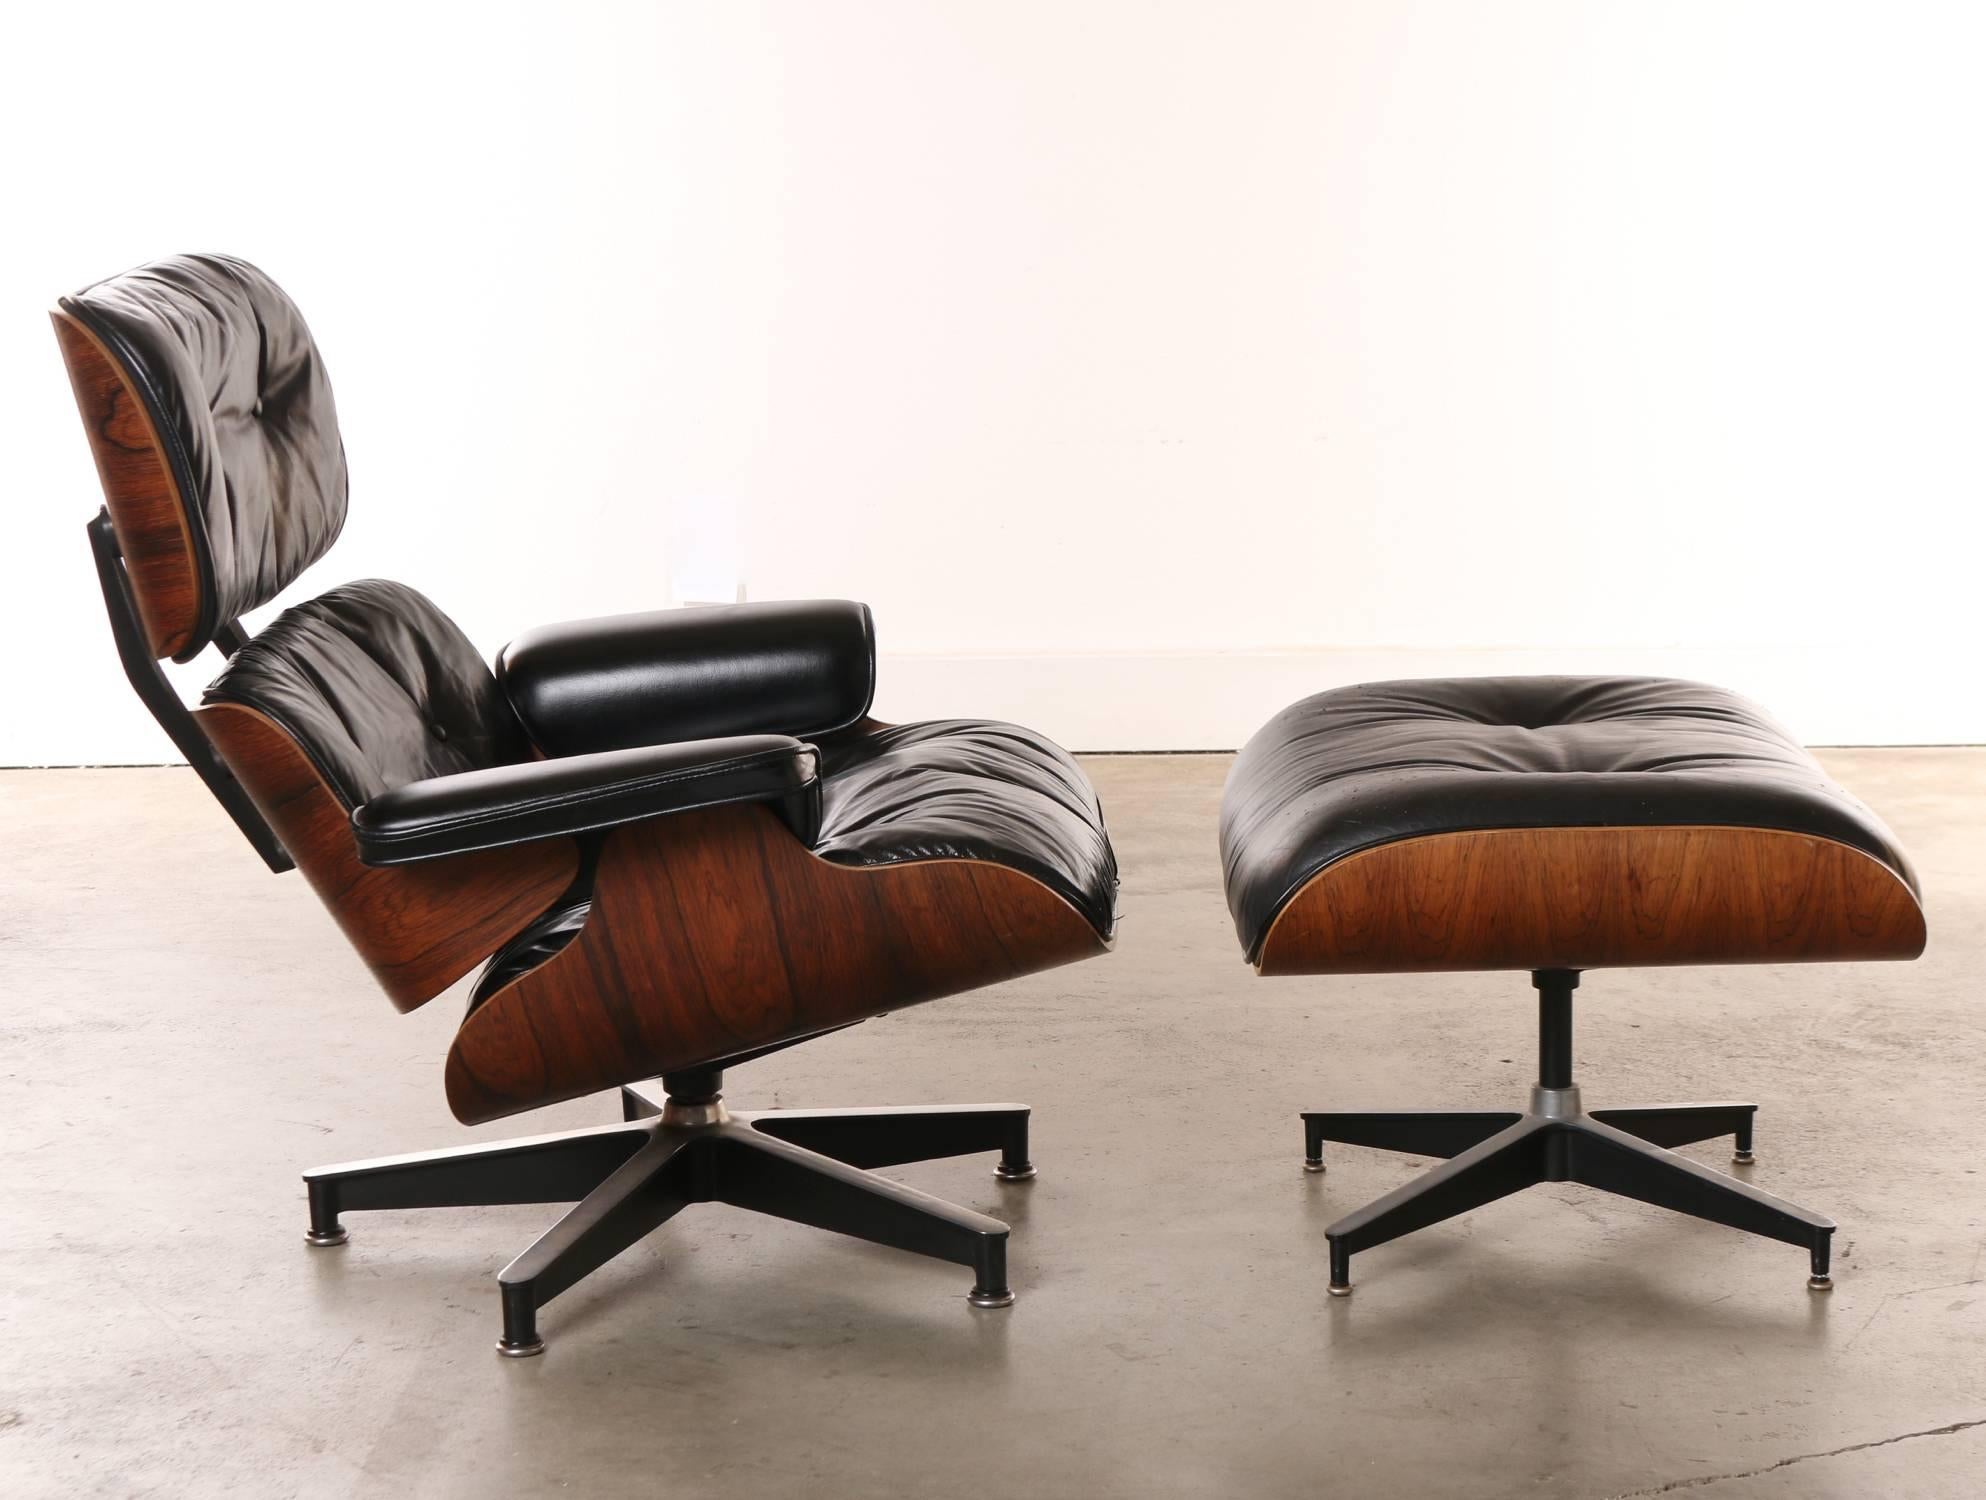 Highly sought after rosewood 670 lounge chair and 671 Ottoman designed by Charles and Ray Eames in 1956 for Herman Miller. The lounge chair has a Herman Miller manufacturer's label on underside that reads: 